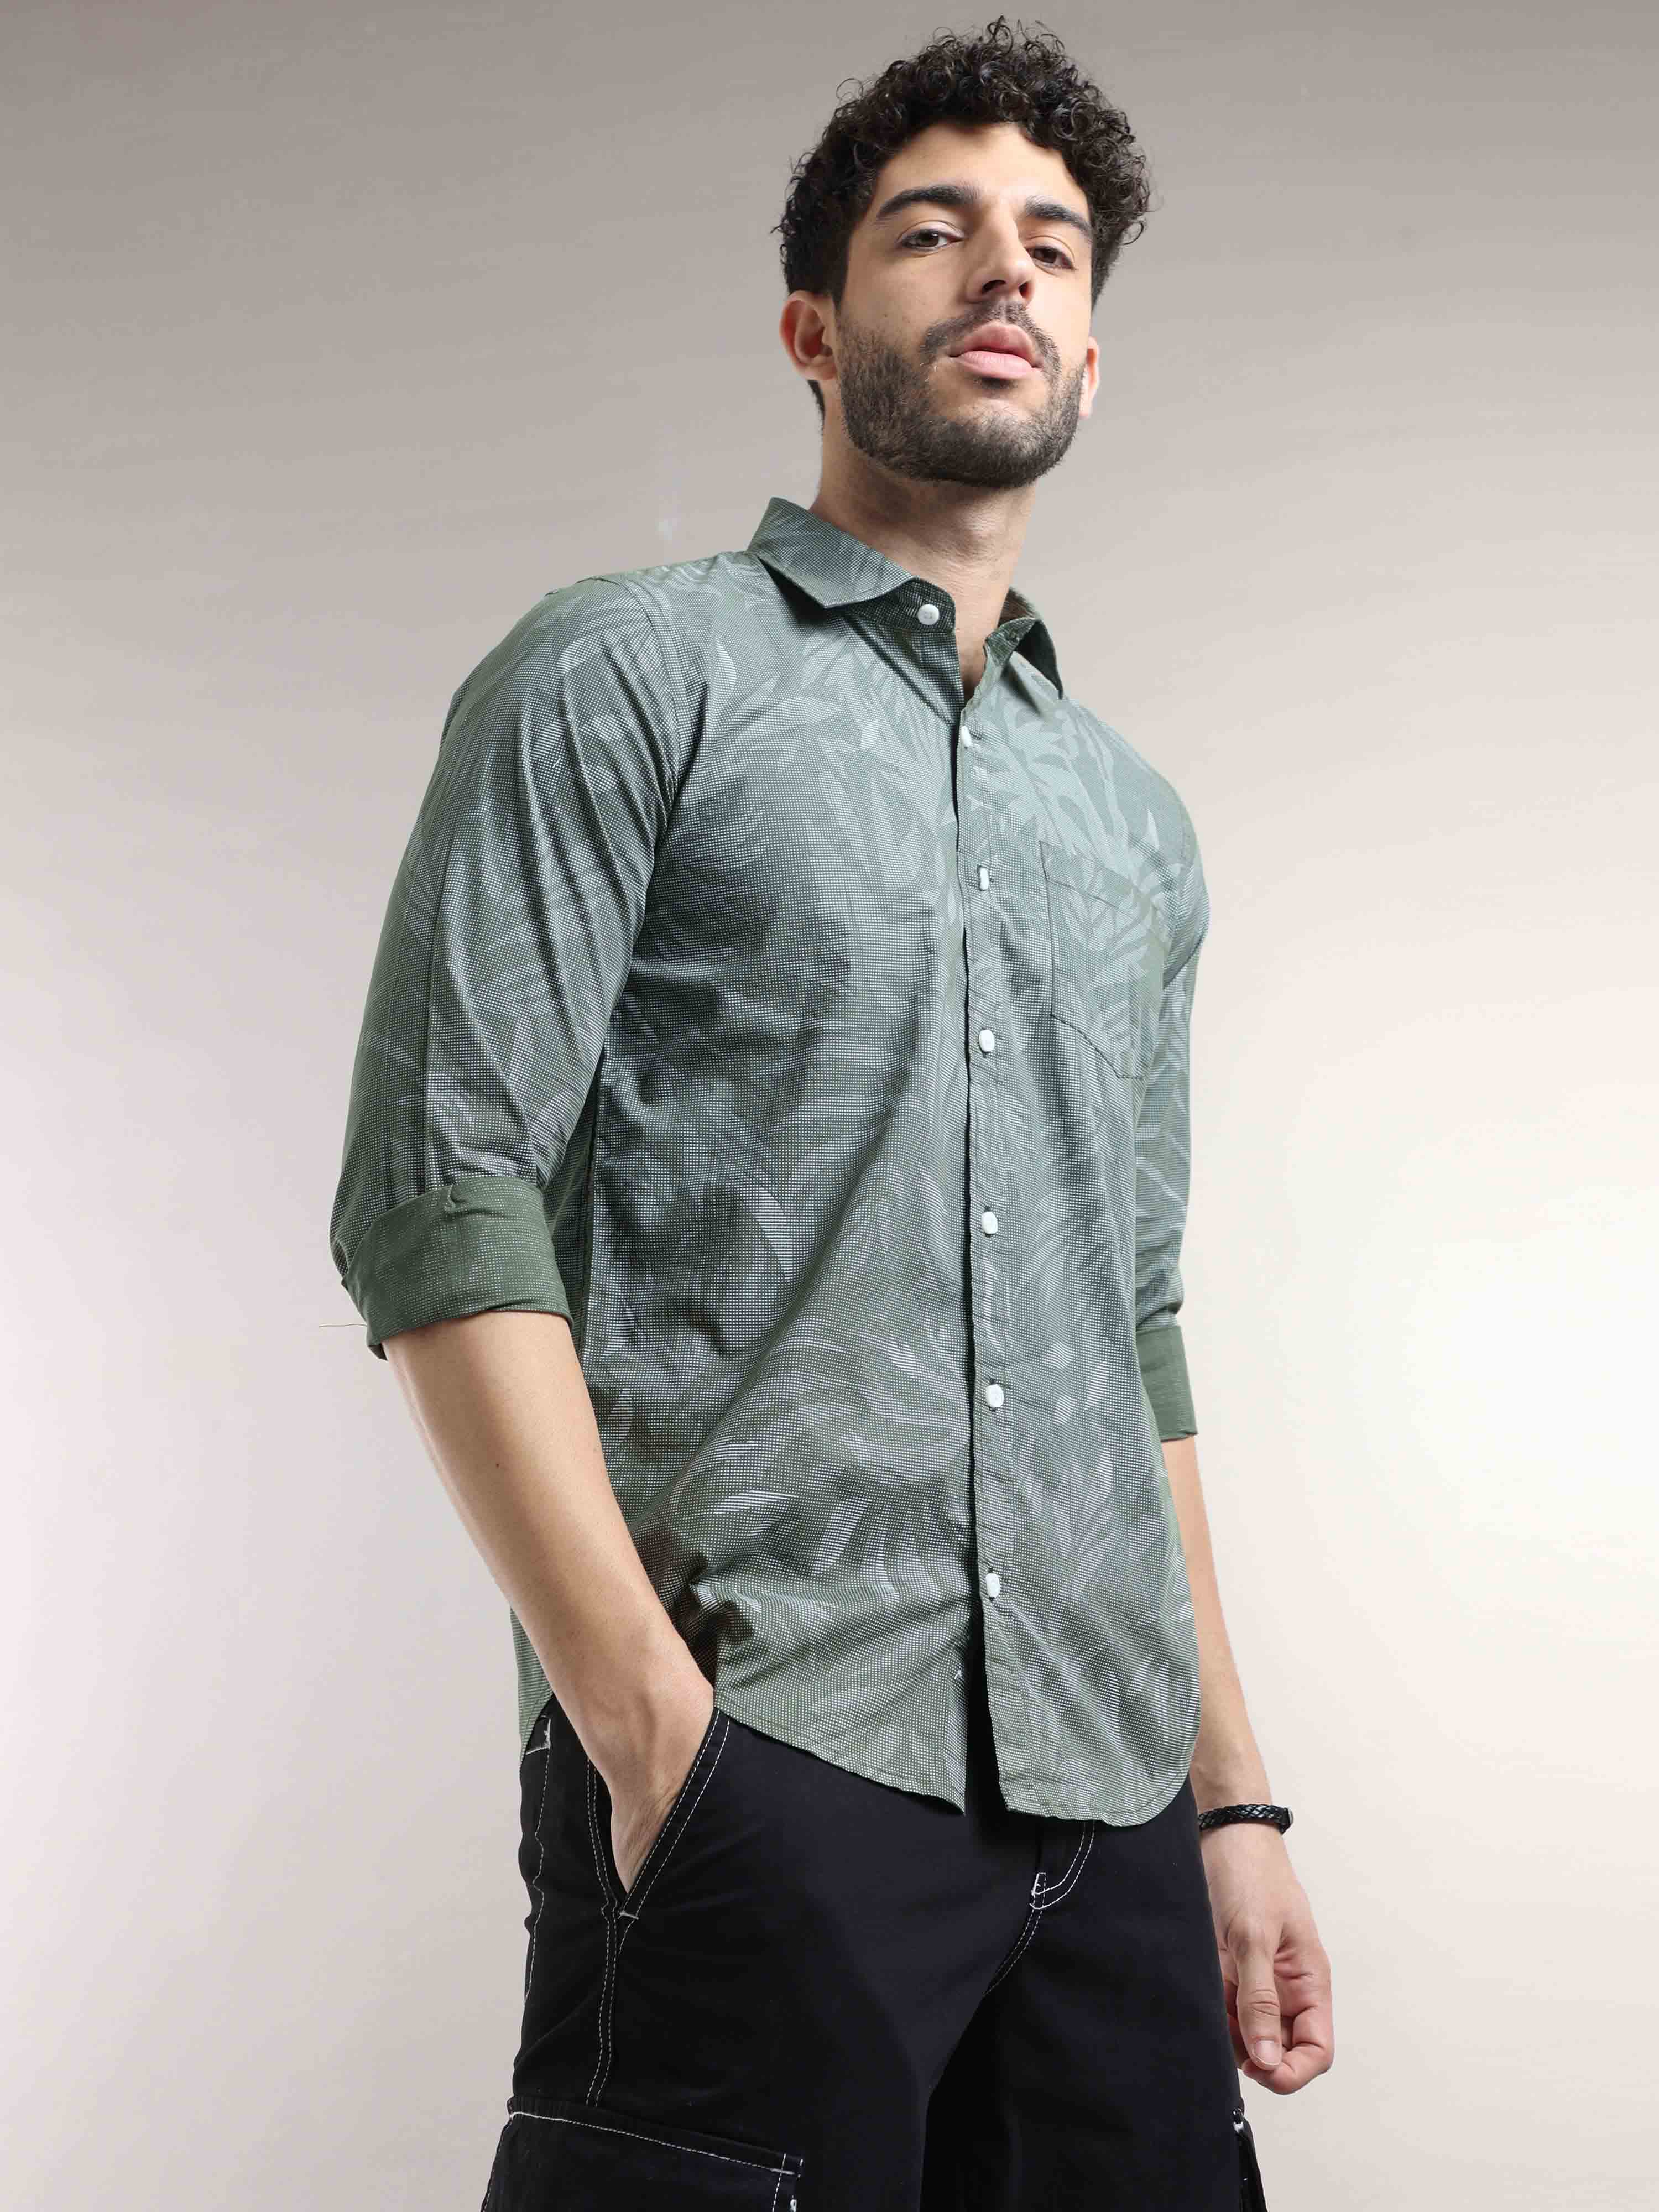 Shop Cool And Comfortable Floral Print Shirt Mens OnlineRs. 1199.00